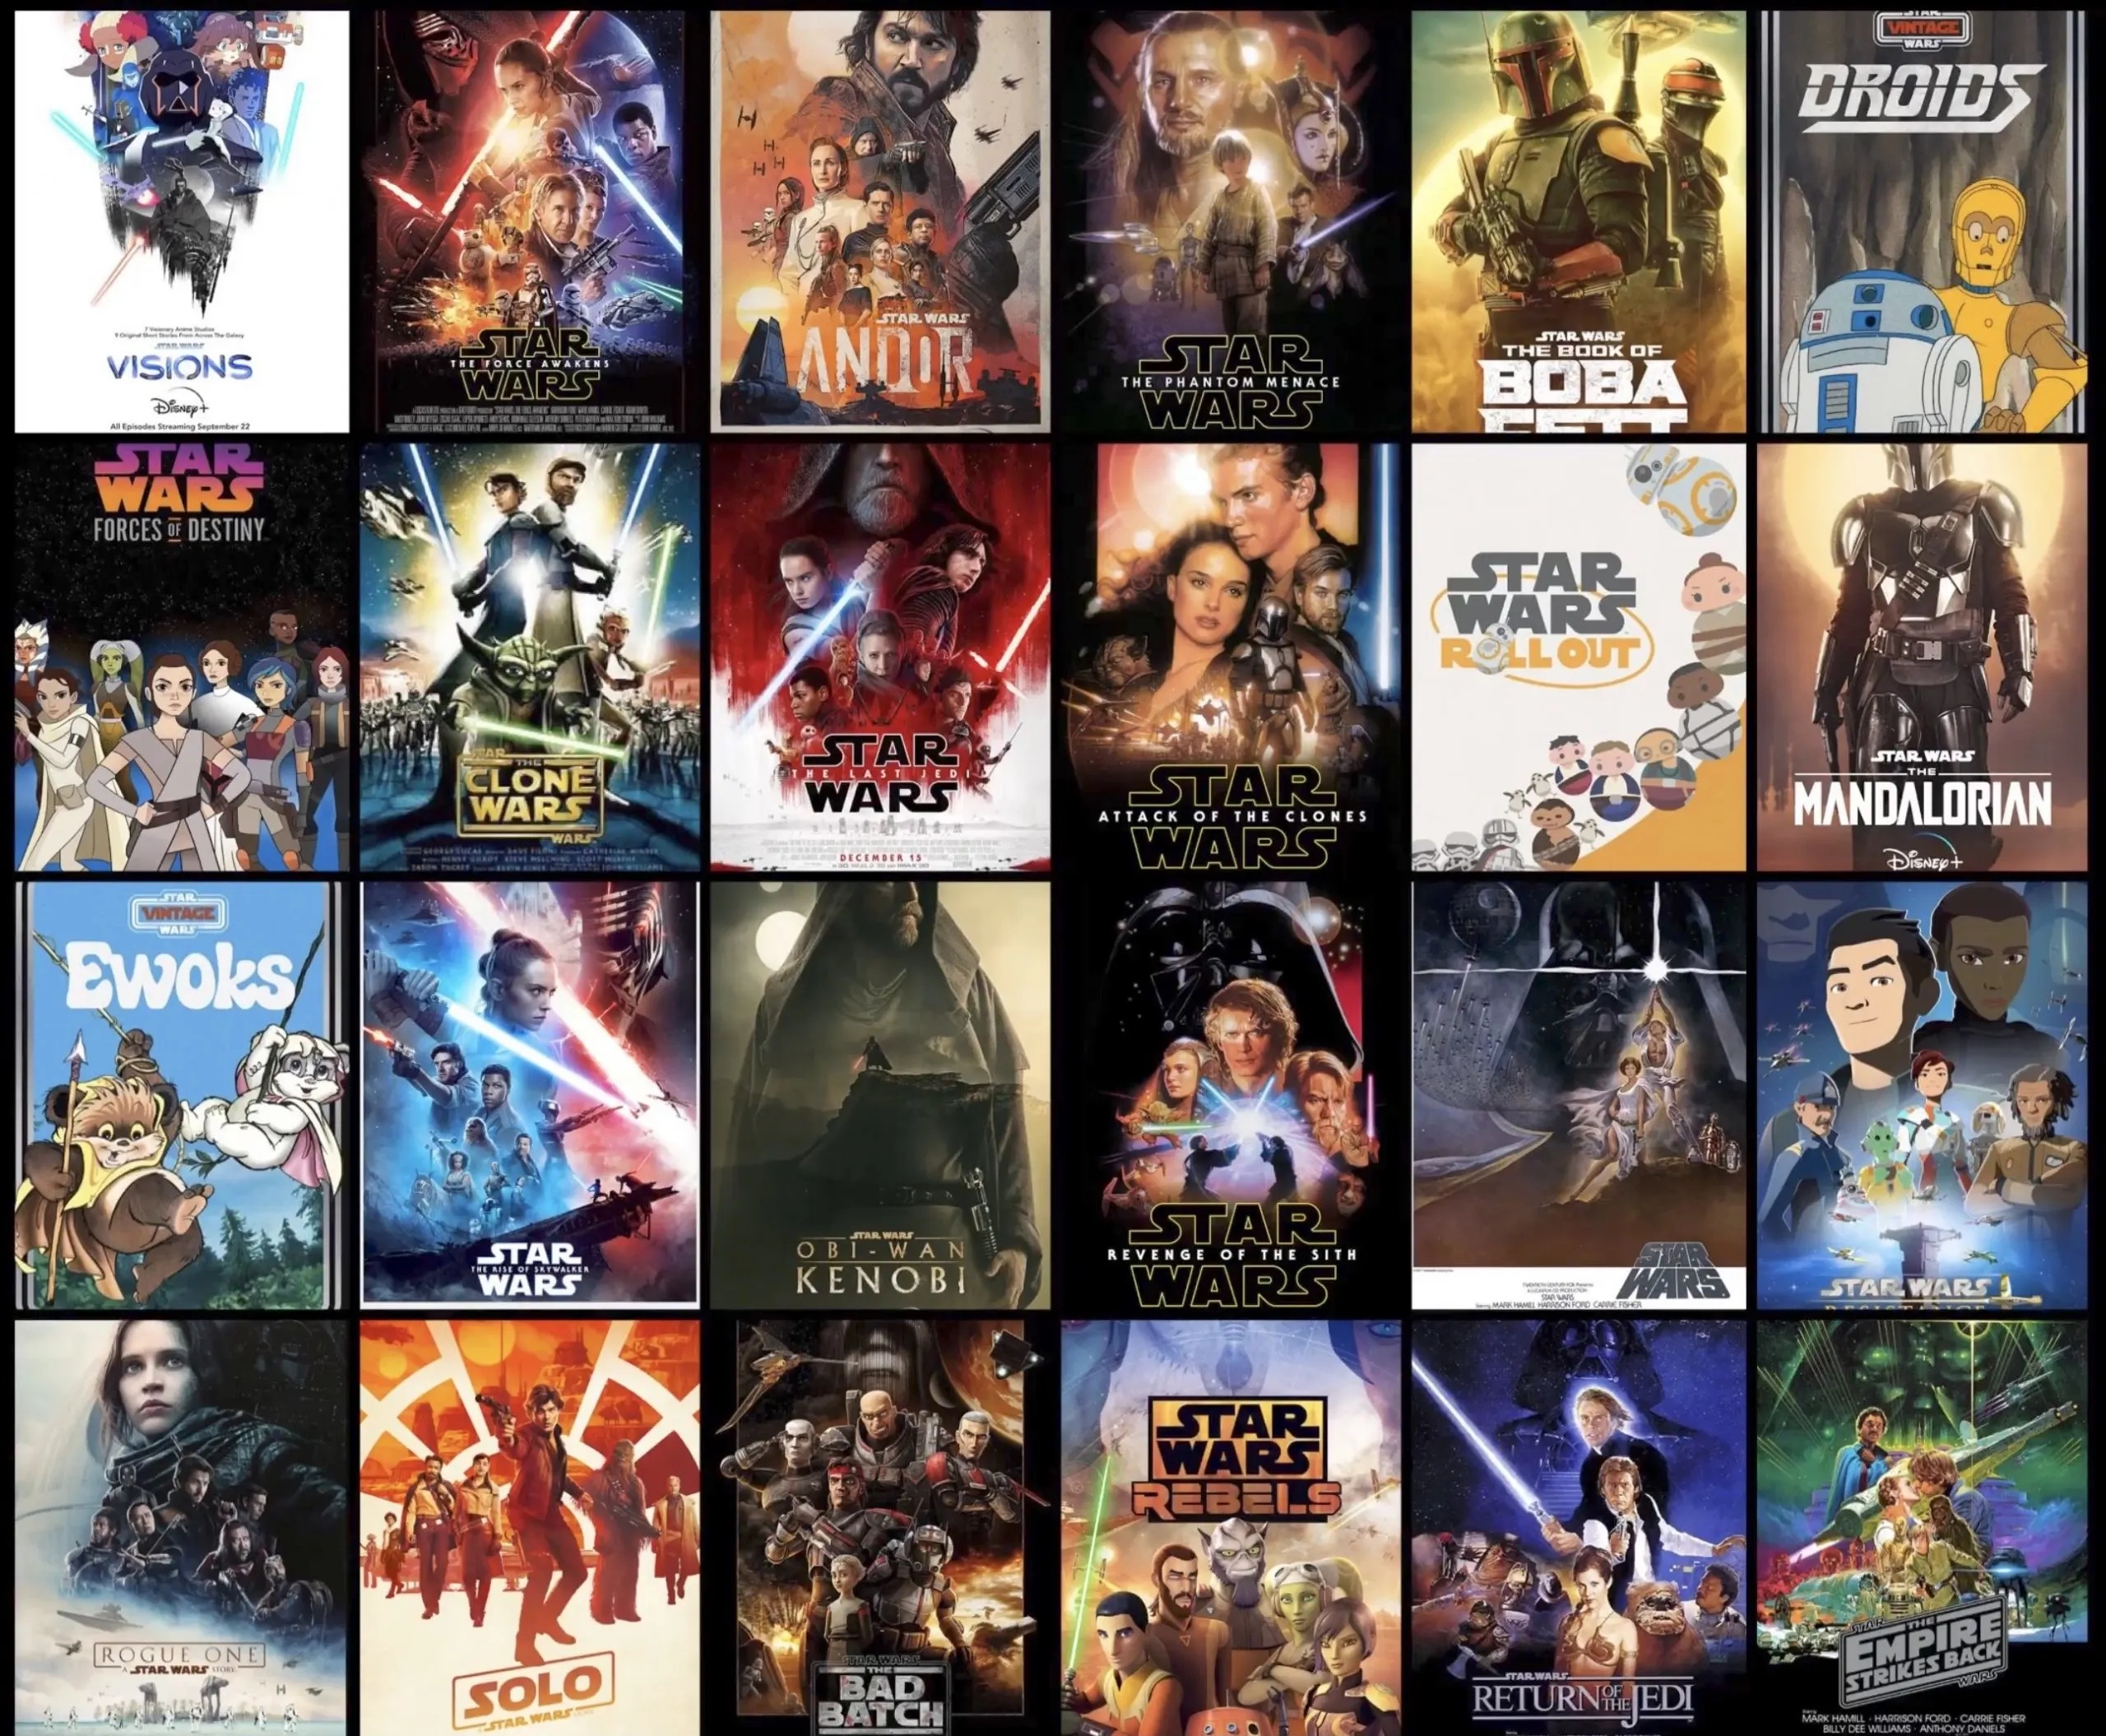 posters for Star Wars shows and films